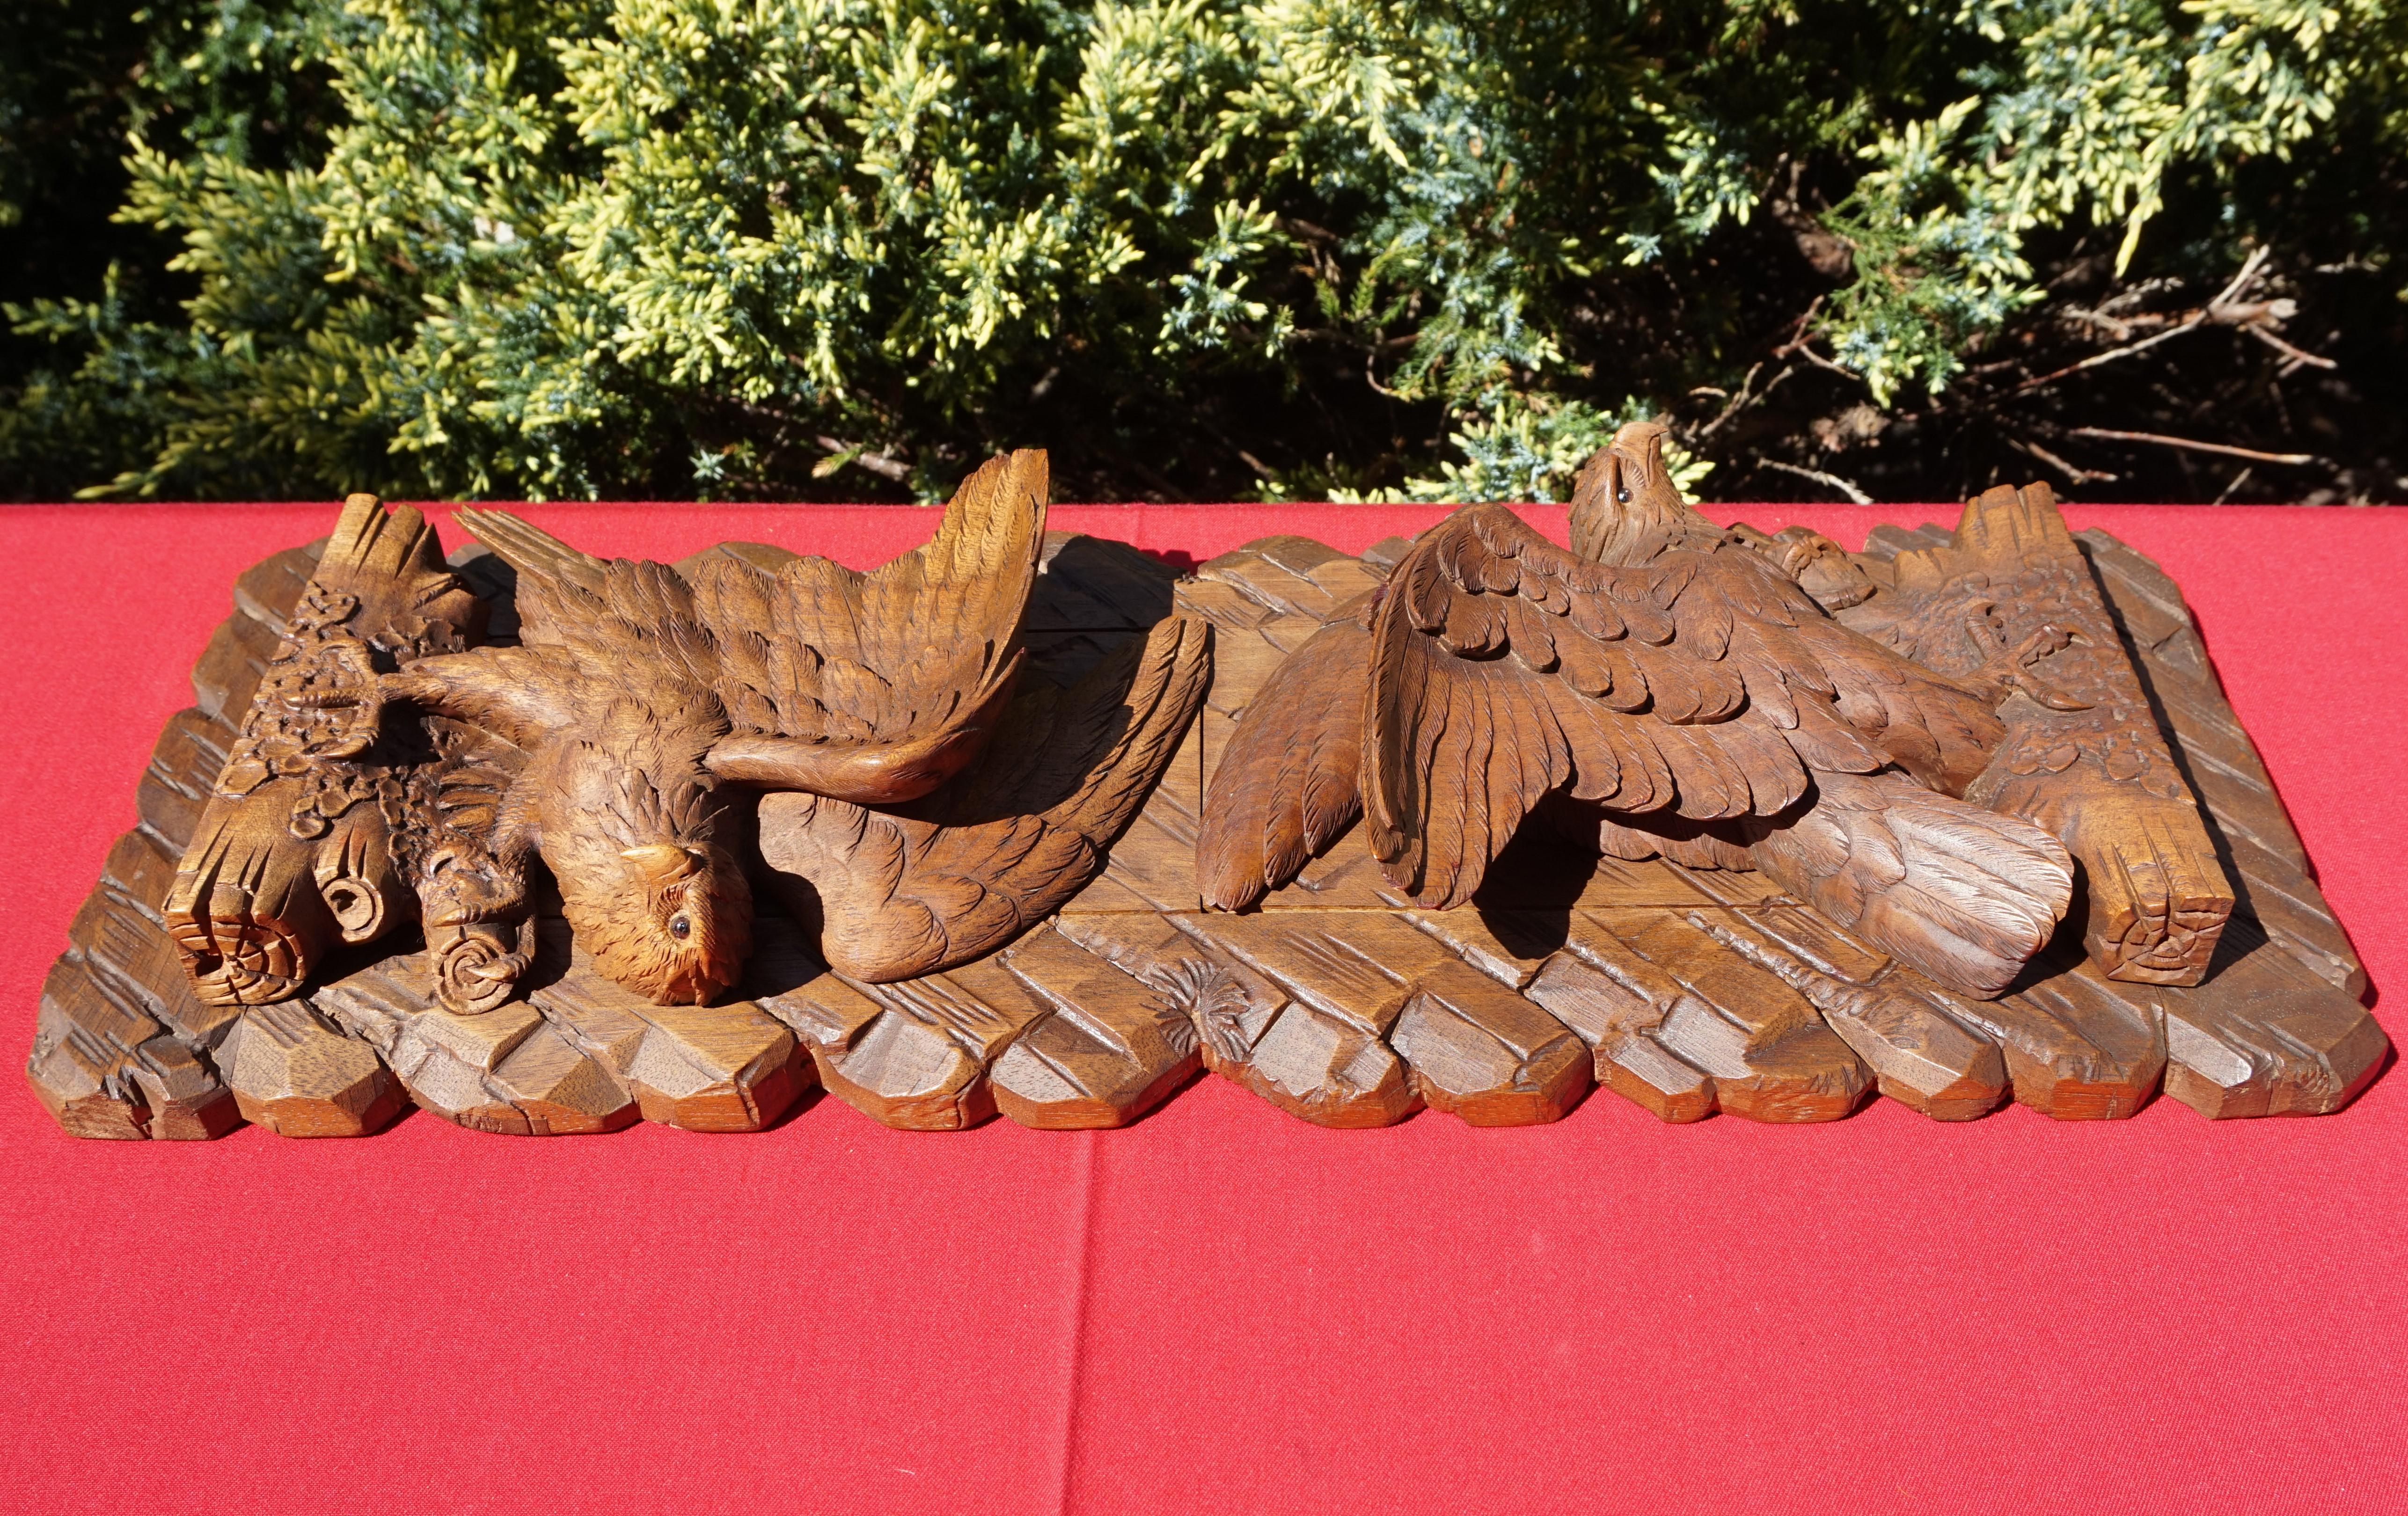 20th Century Swiss Black Forest Nutwood Books Rack or Stand with Carved Eagle Sculptures